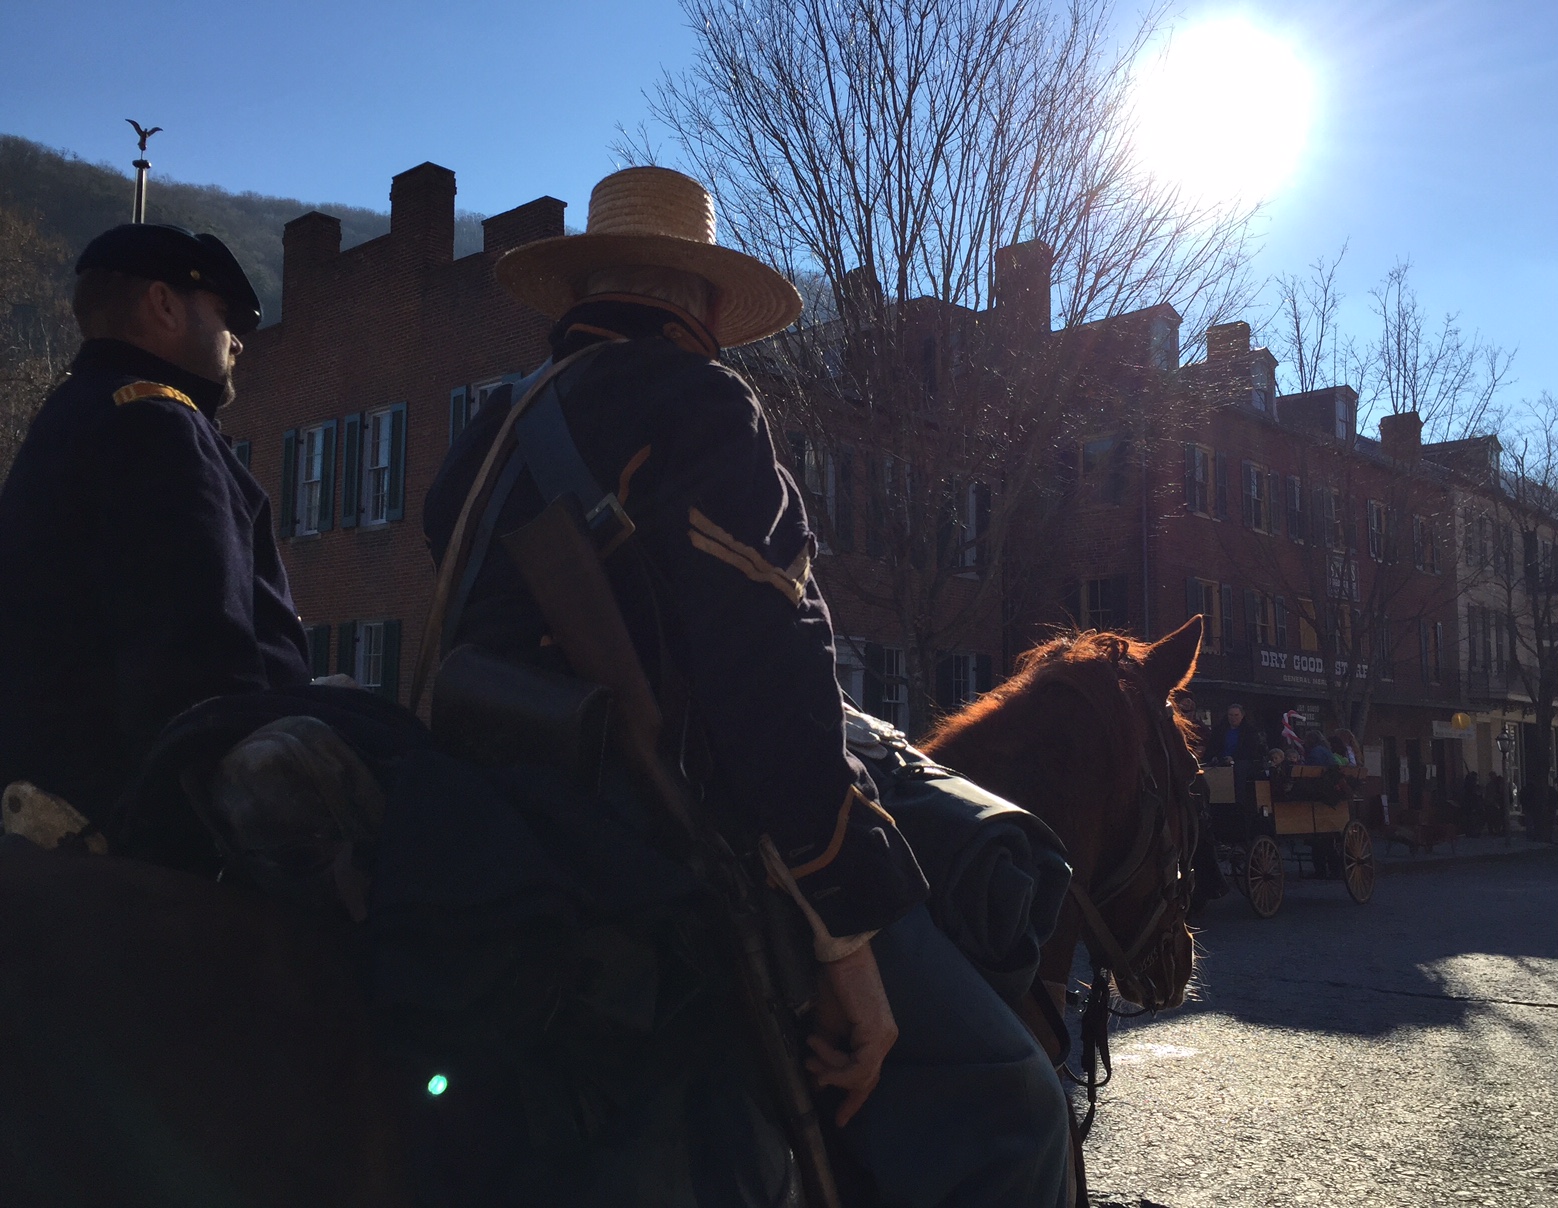 Joy in Sadness, Harpers Ferry's Civil War Christmas